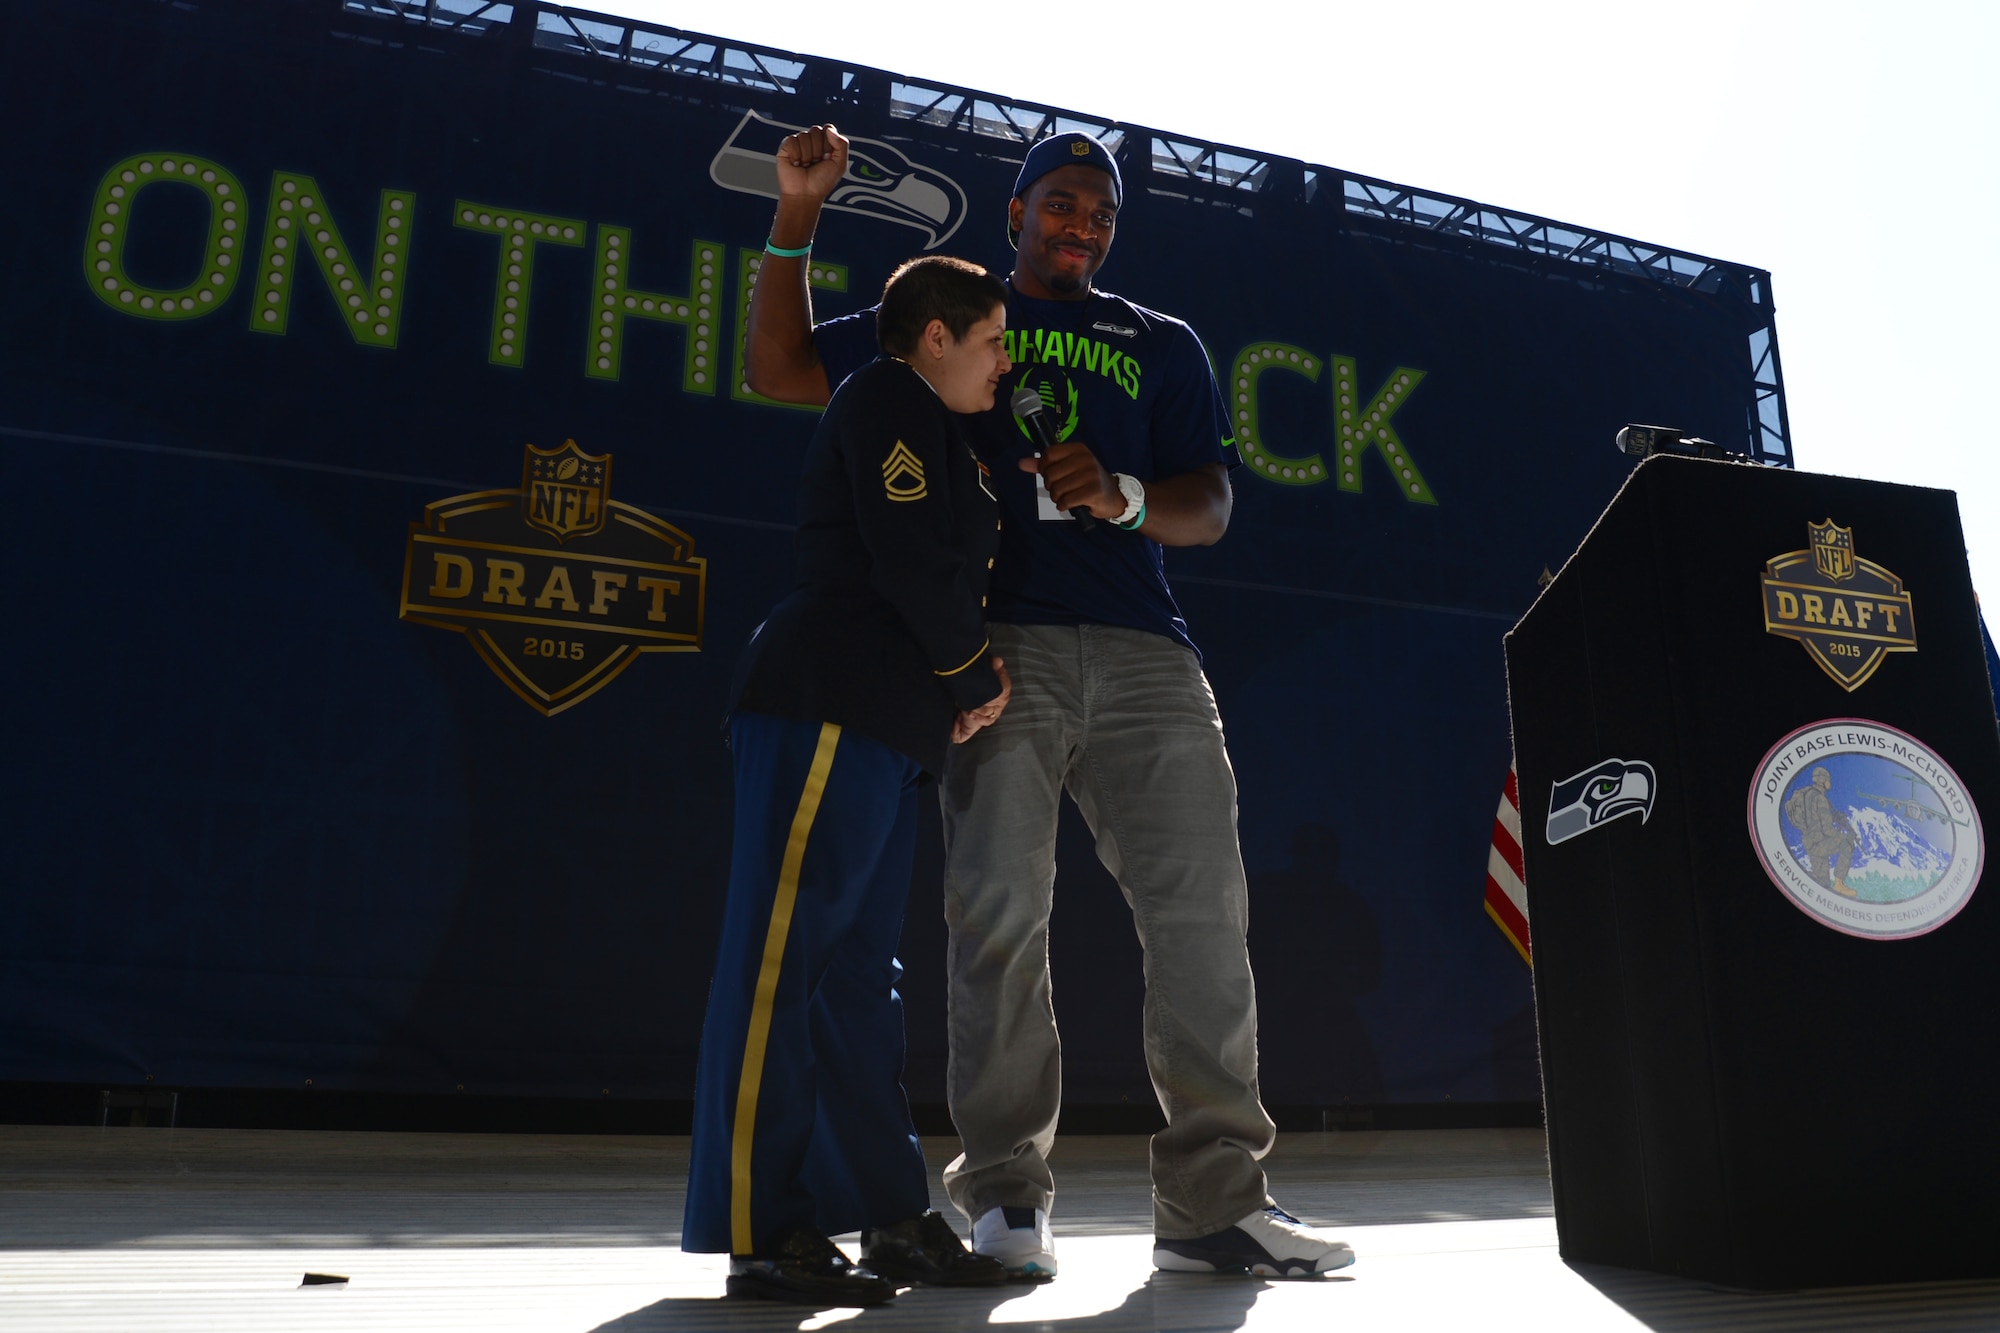 Sgt. 1st Class Madeline Diaz, 47th Combat Support Hospital, answers questions from Greg Scruggs, Seattle Seahawks defensive end, on Joint Base Lewis-McChord, Wash., May 2, 2015. Diaz announced one of the 2015 National Football League draft picks for the Seahawks during the JBLM draft day event. (U.S. Air Force photo\ Staff Sgt. Tim Chacon)